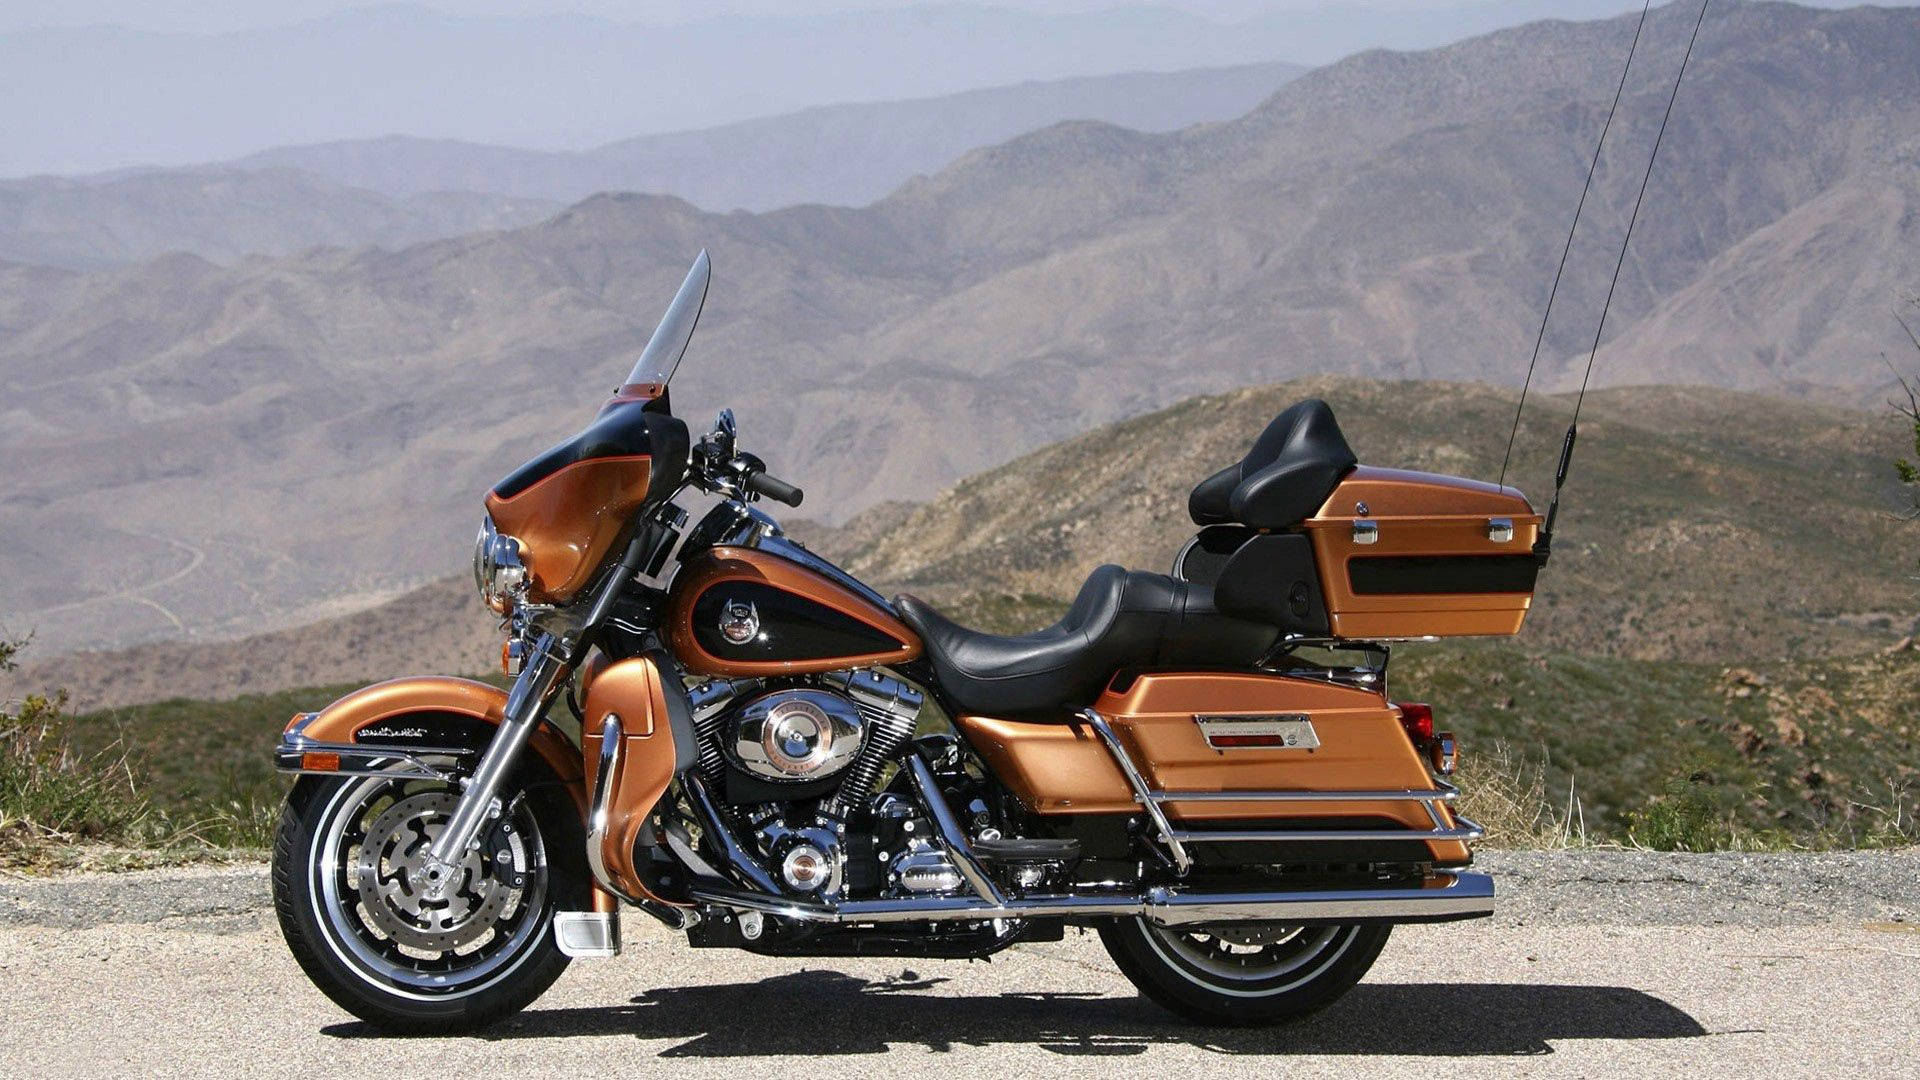 A rugged Harley davidson motorcycle with amazing features. Wallpaper